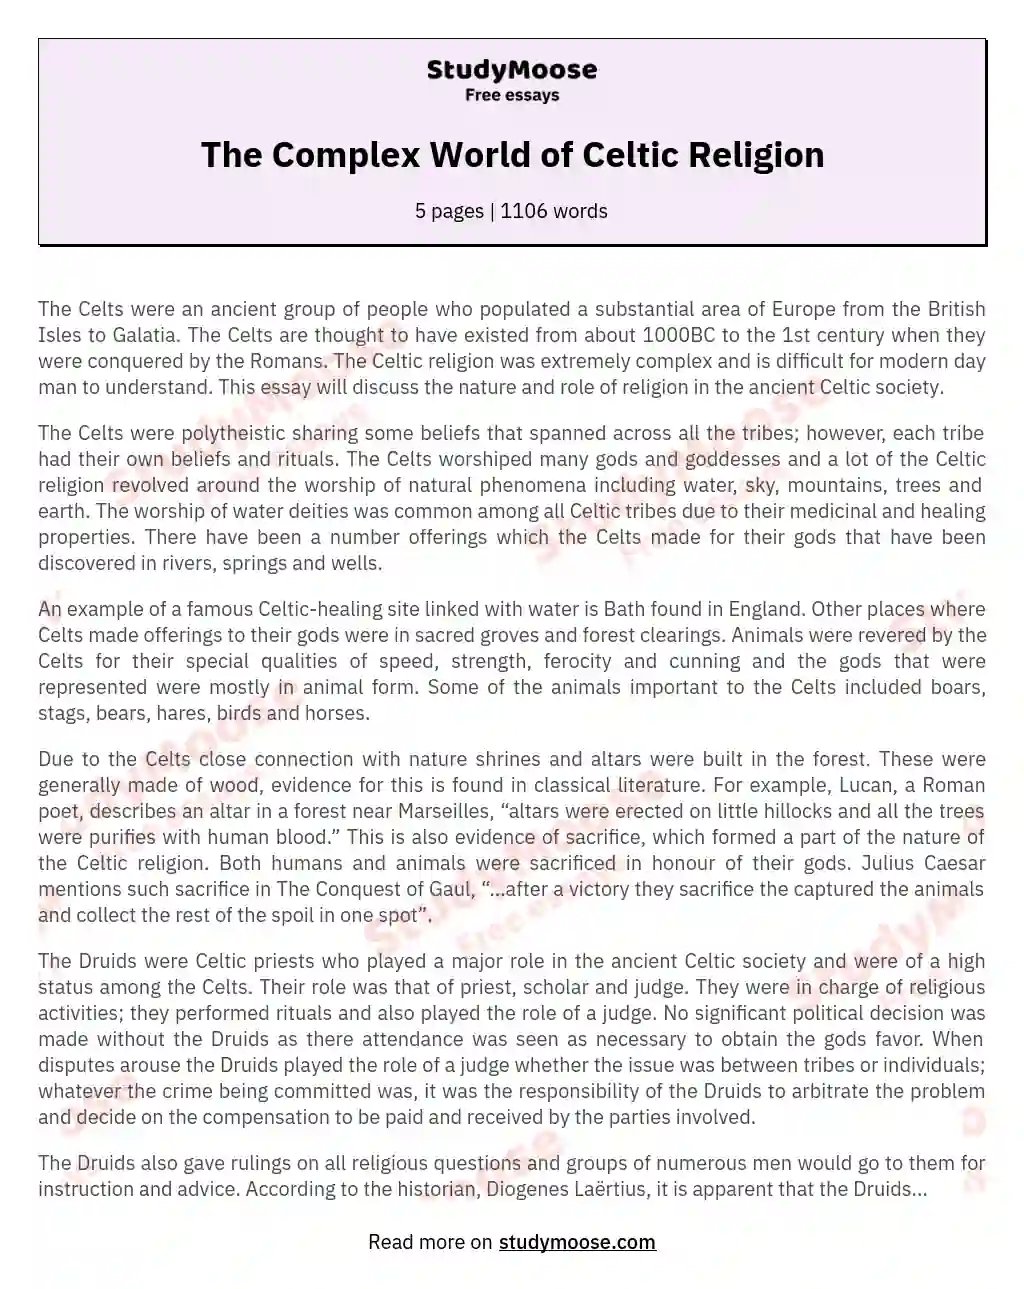 The Complex World of Celtic Religion essay